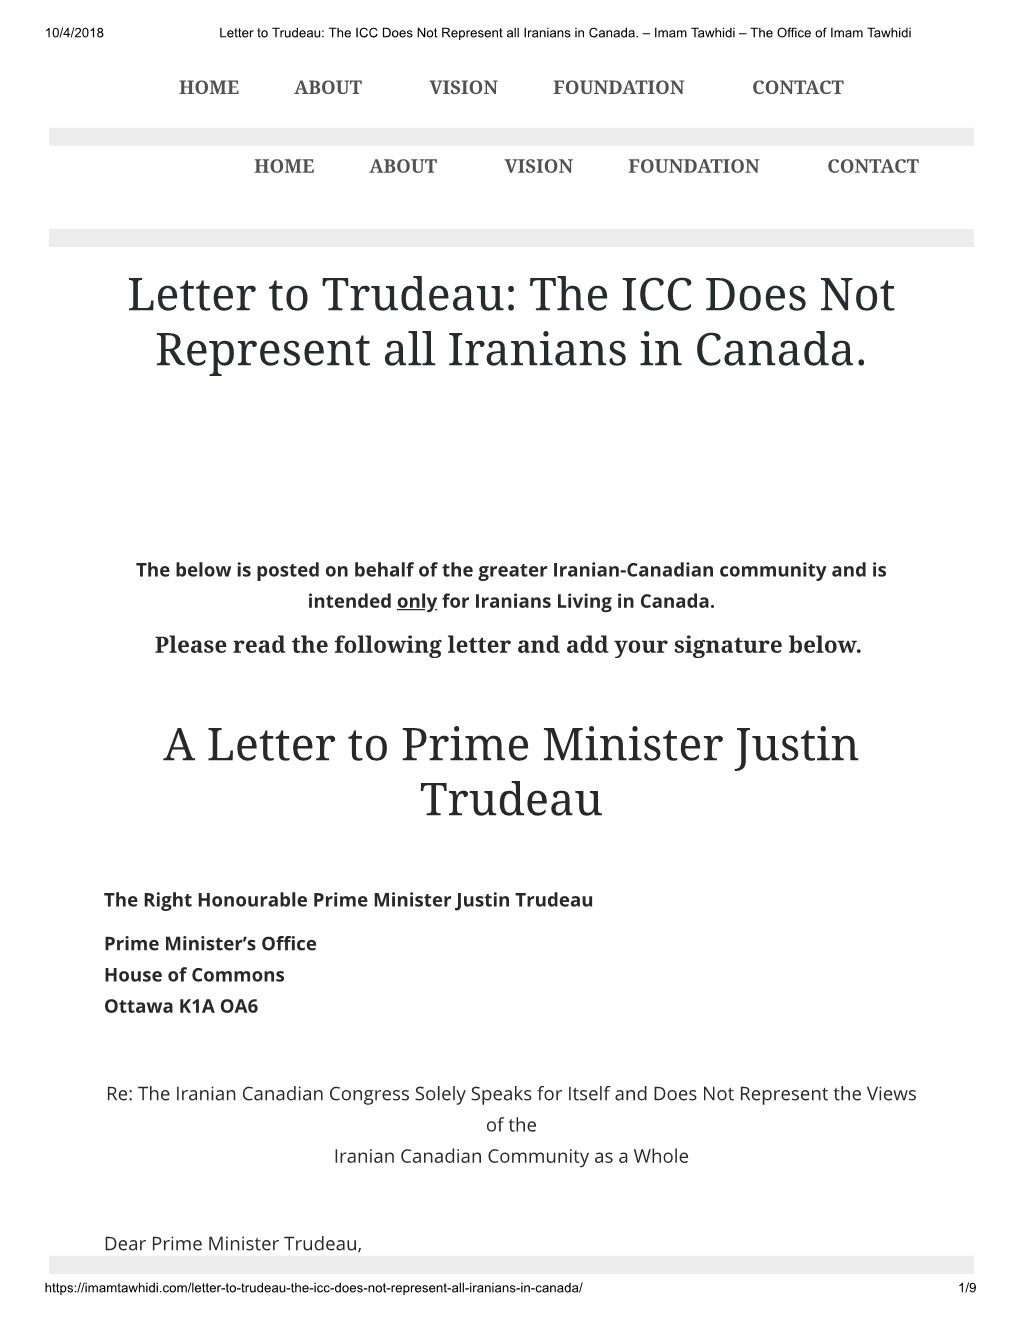 The ICC Does Not Represent All Iranians in Canada